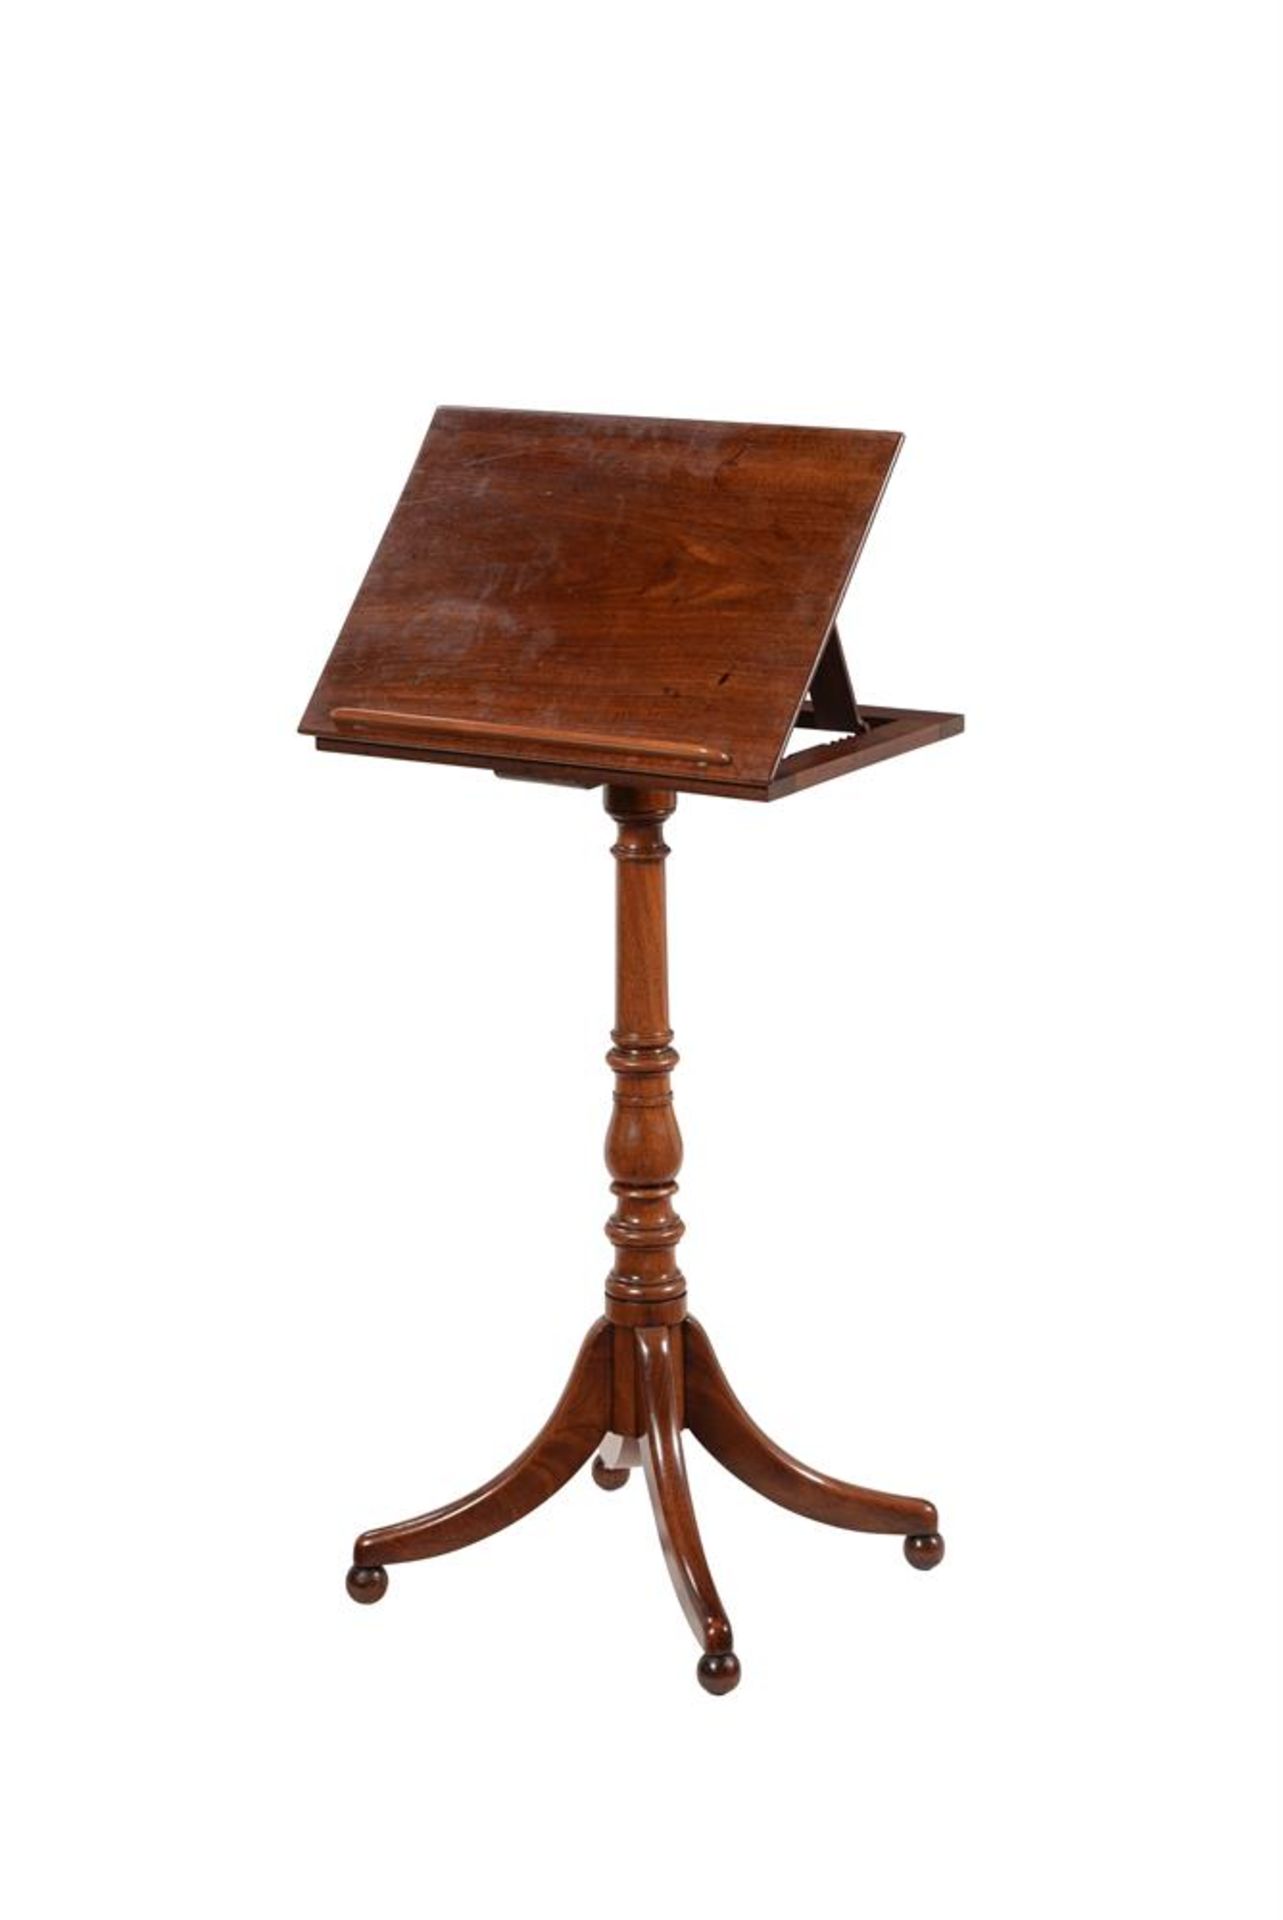 A REGENCY MAHOGANY READING OR MUSIC STAND